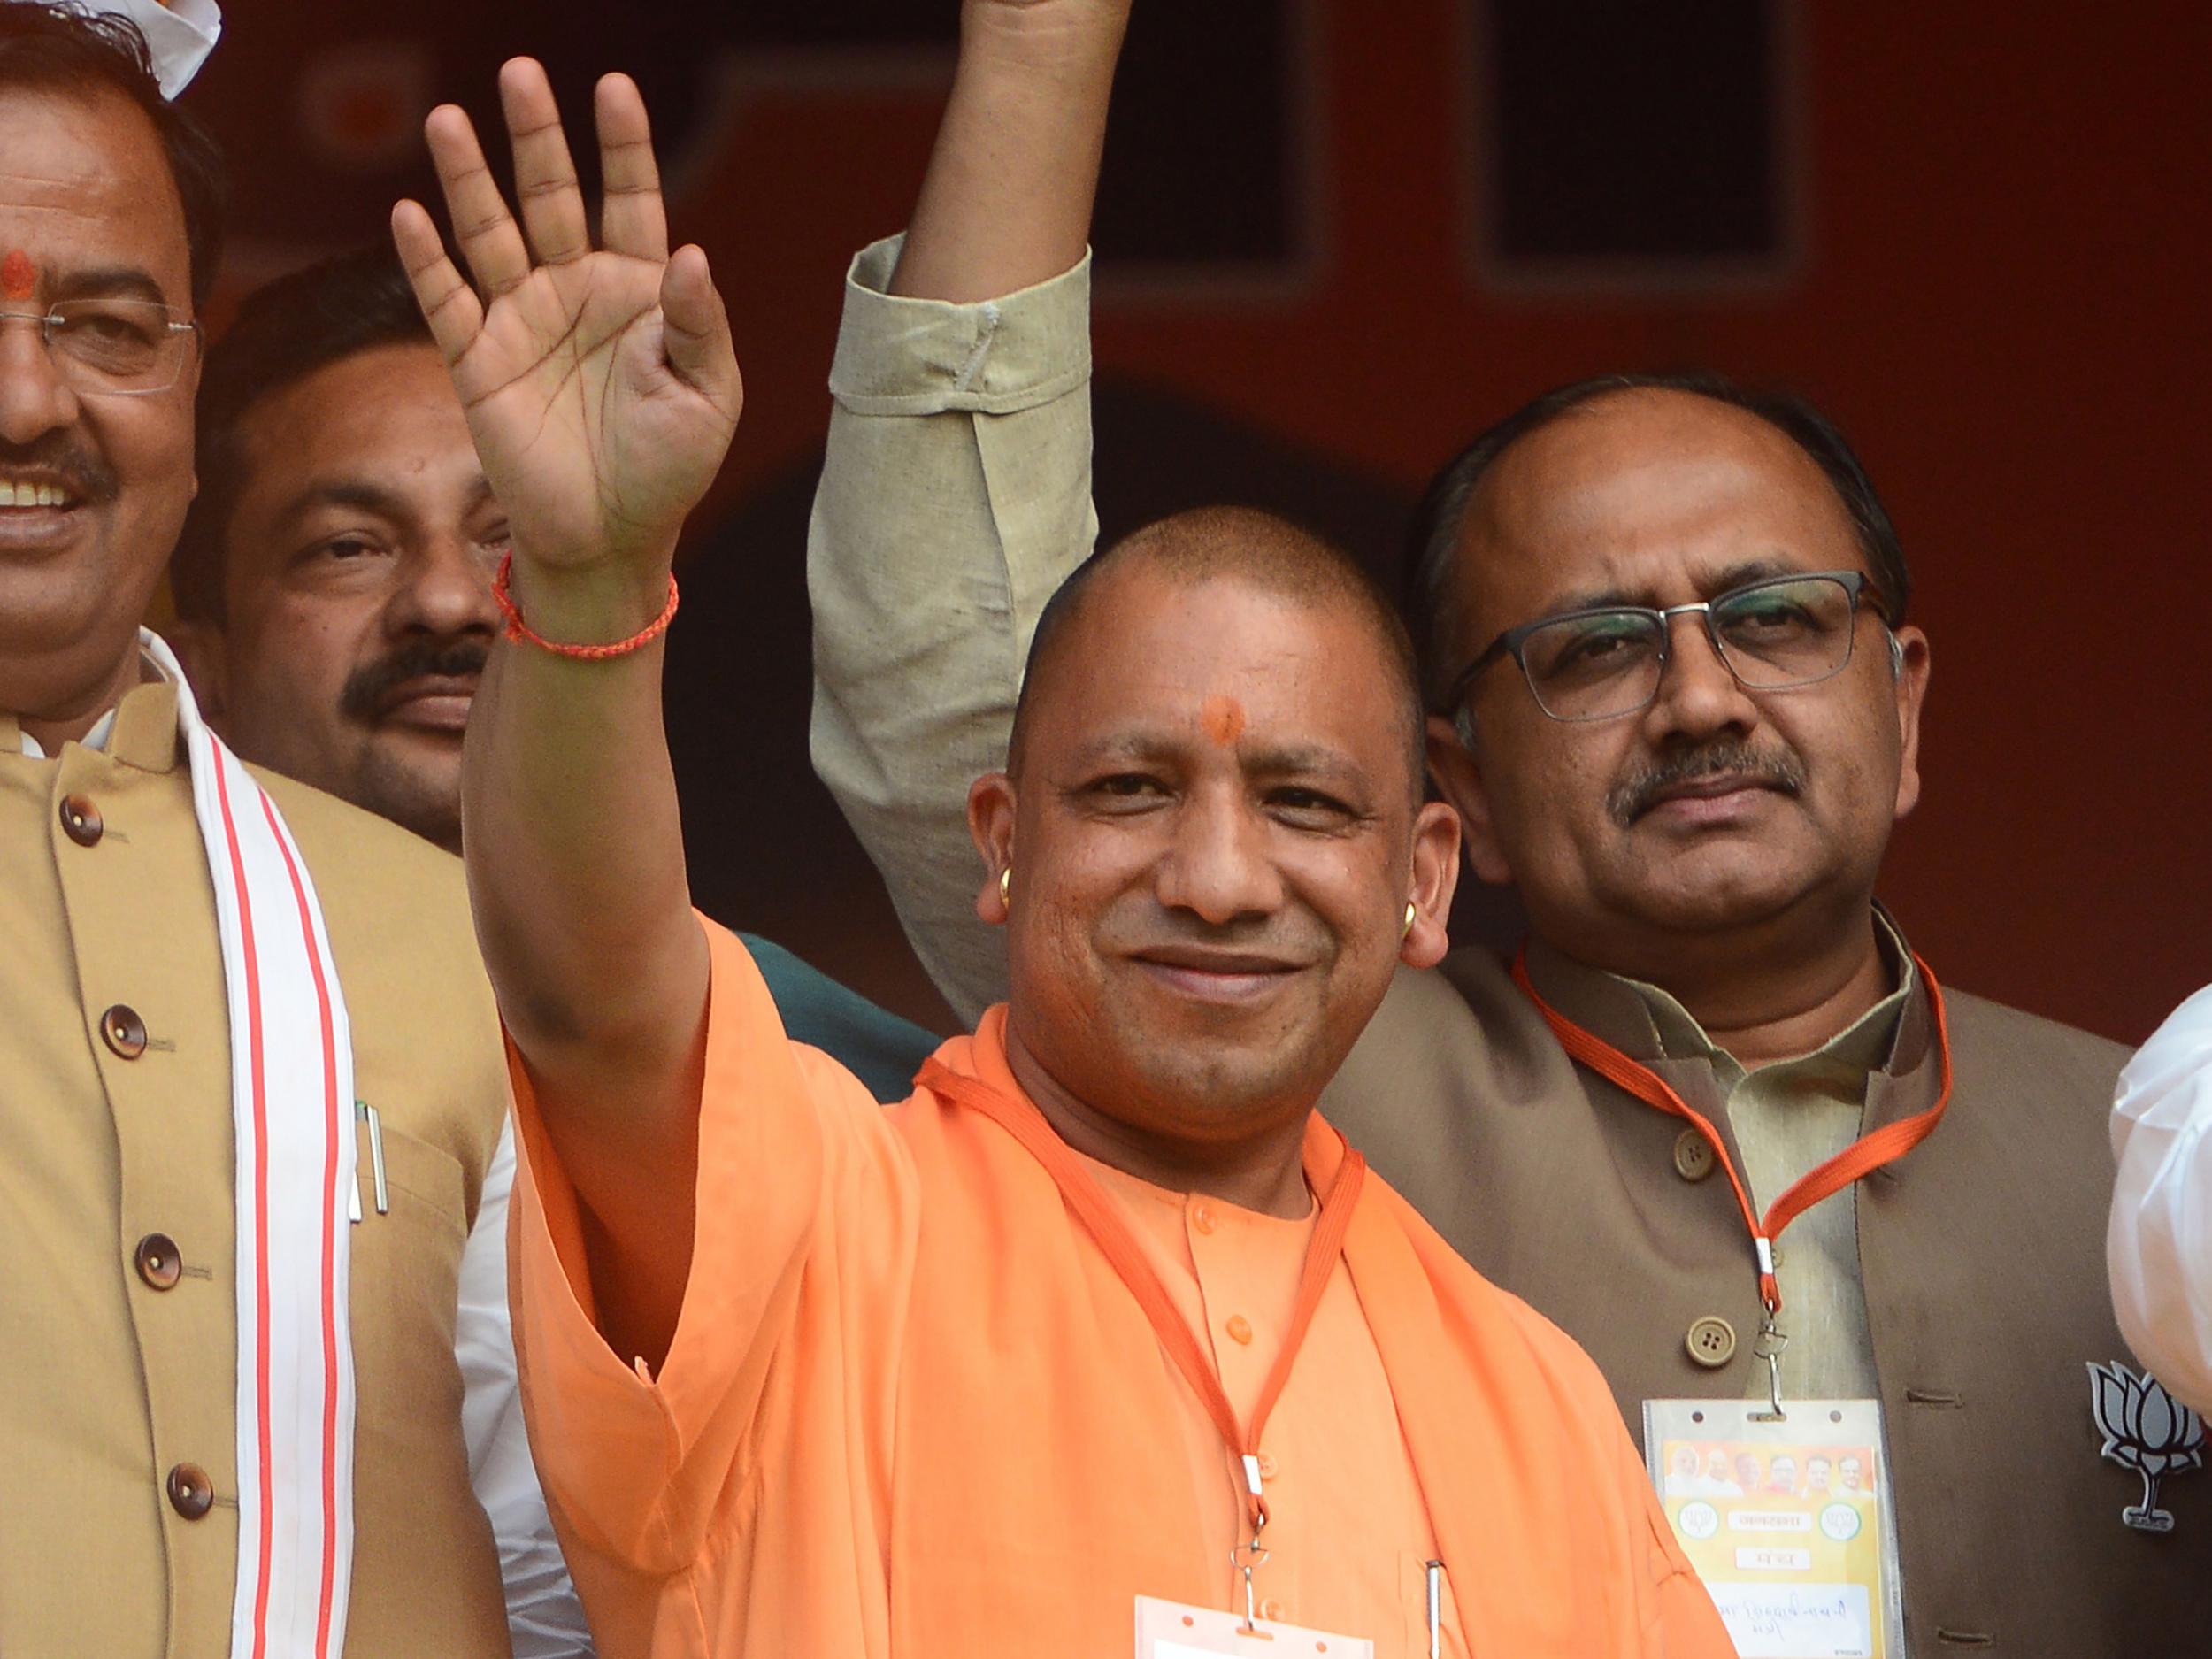 Uttar Pradesh's cabinet, which is led by a hardline Hindu nationalist preacher Yogi Adityanath (centre), agreed the proposal in the face of protests from opposition parties